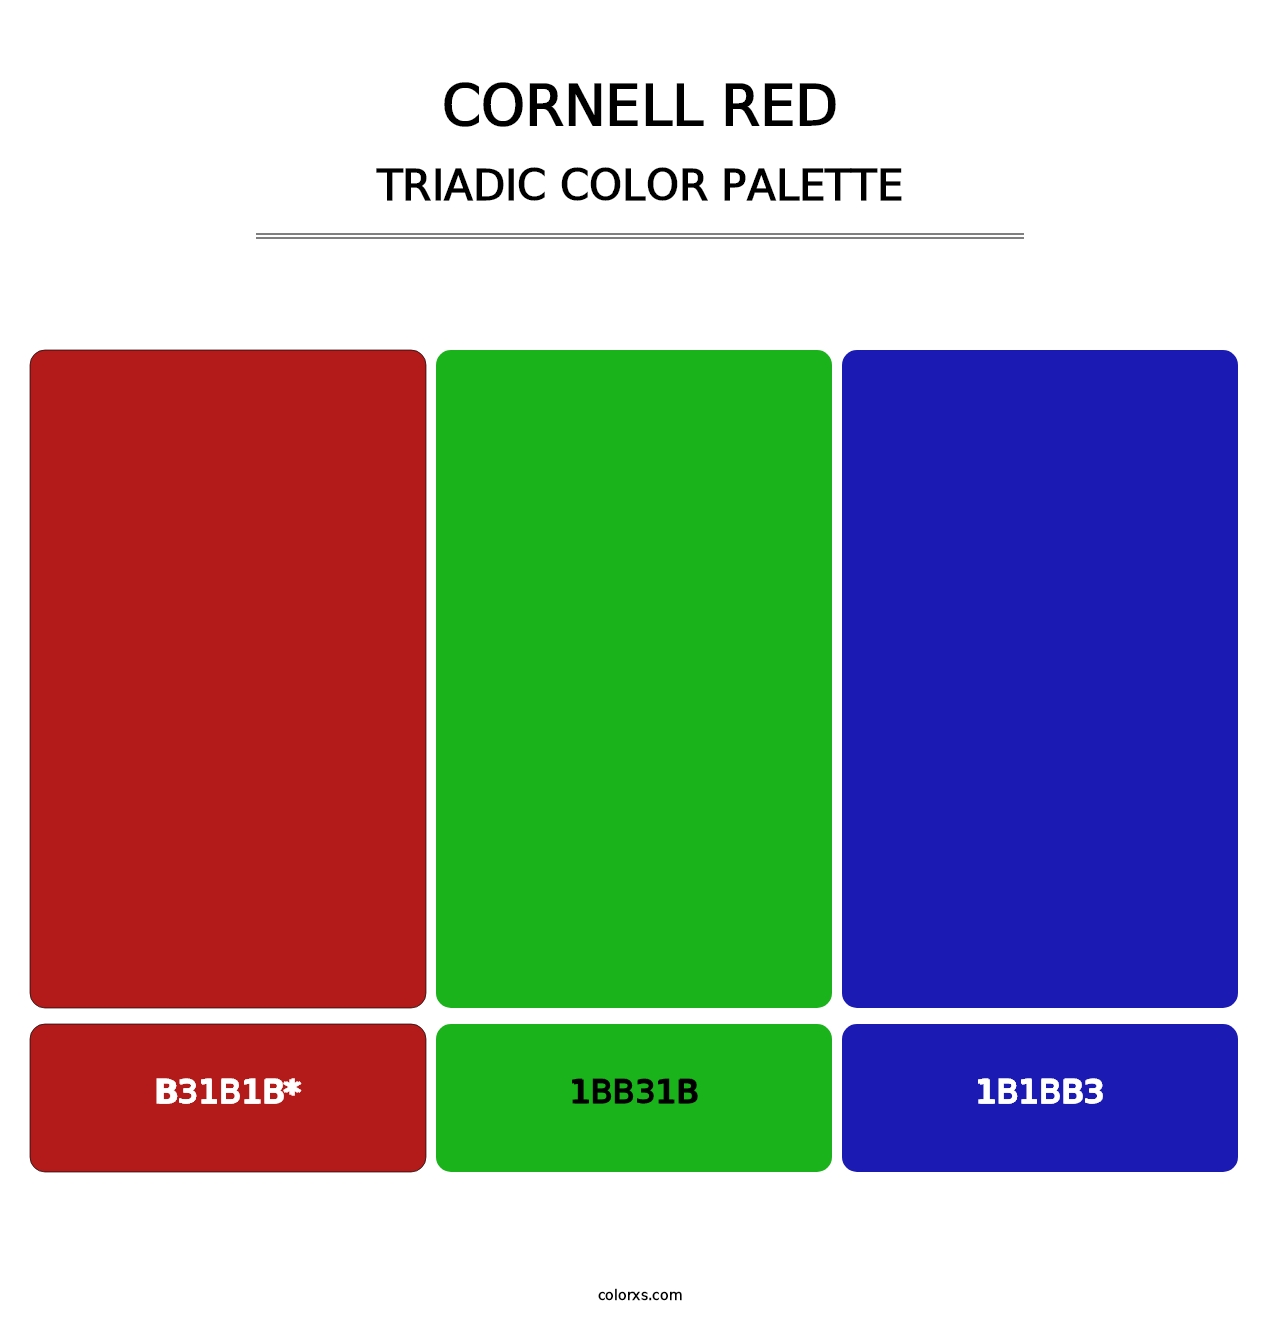 Cornell Red - Triadic Color Palette